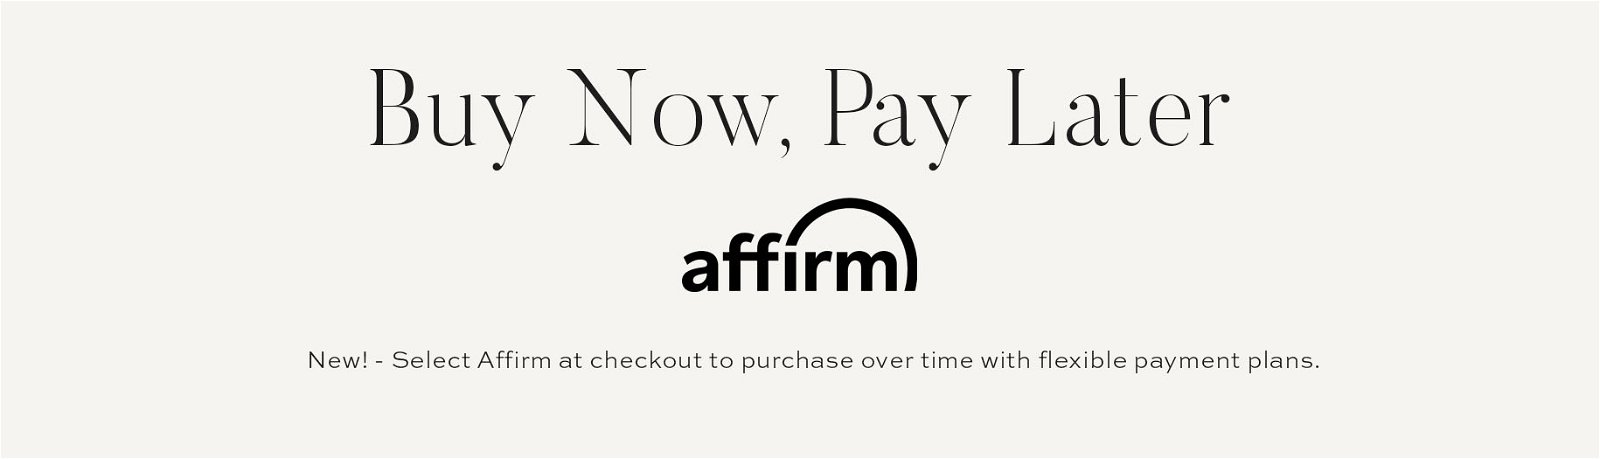 Buy Now, Pay later with Affirm // New! - Select affirm at checkout to purchase over time with flexible payment plans